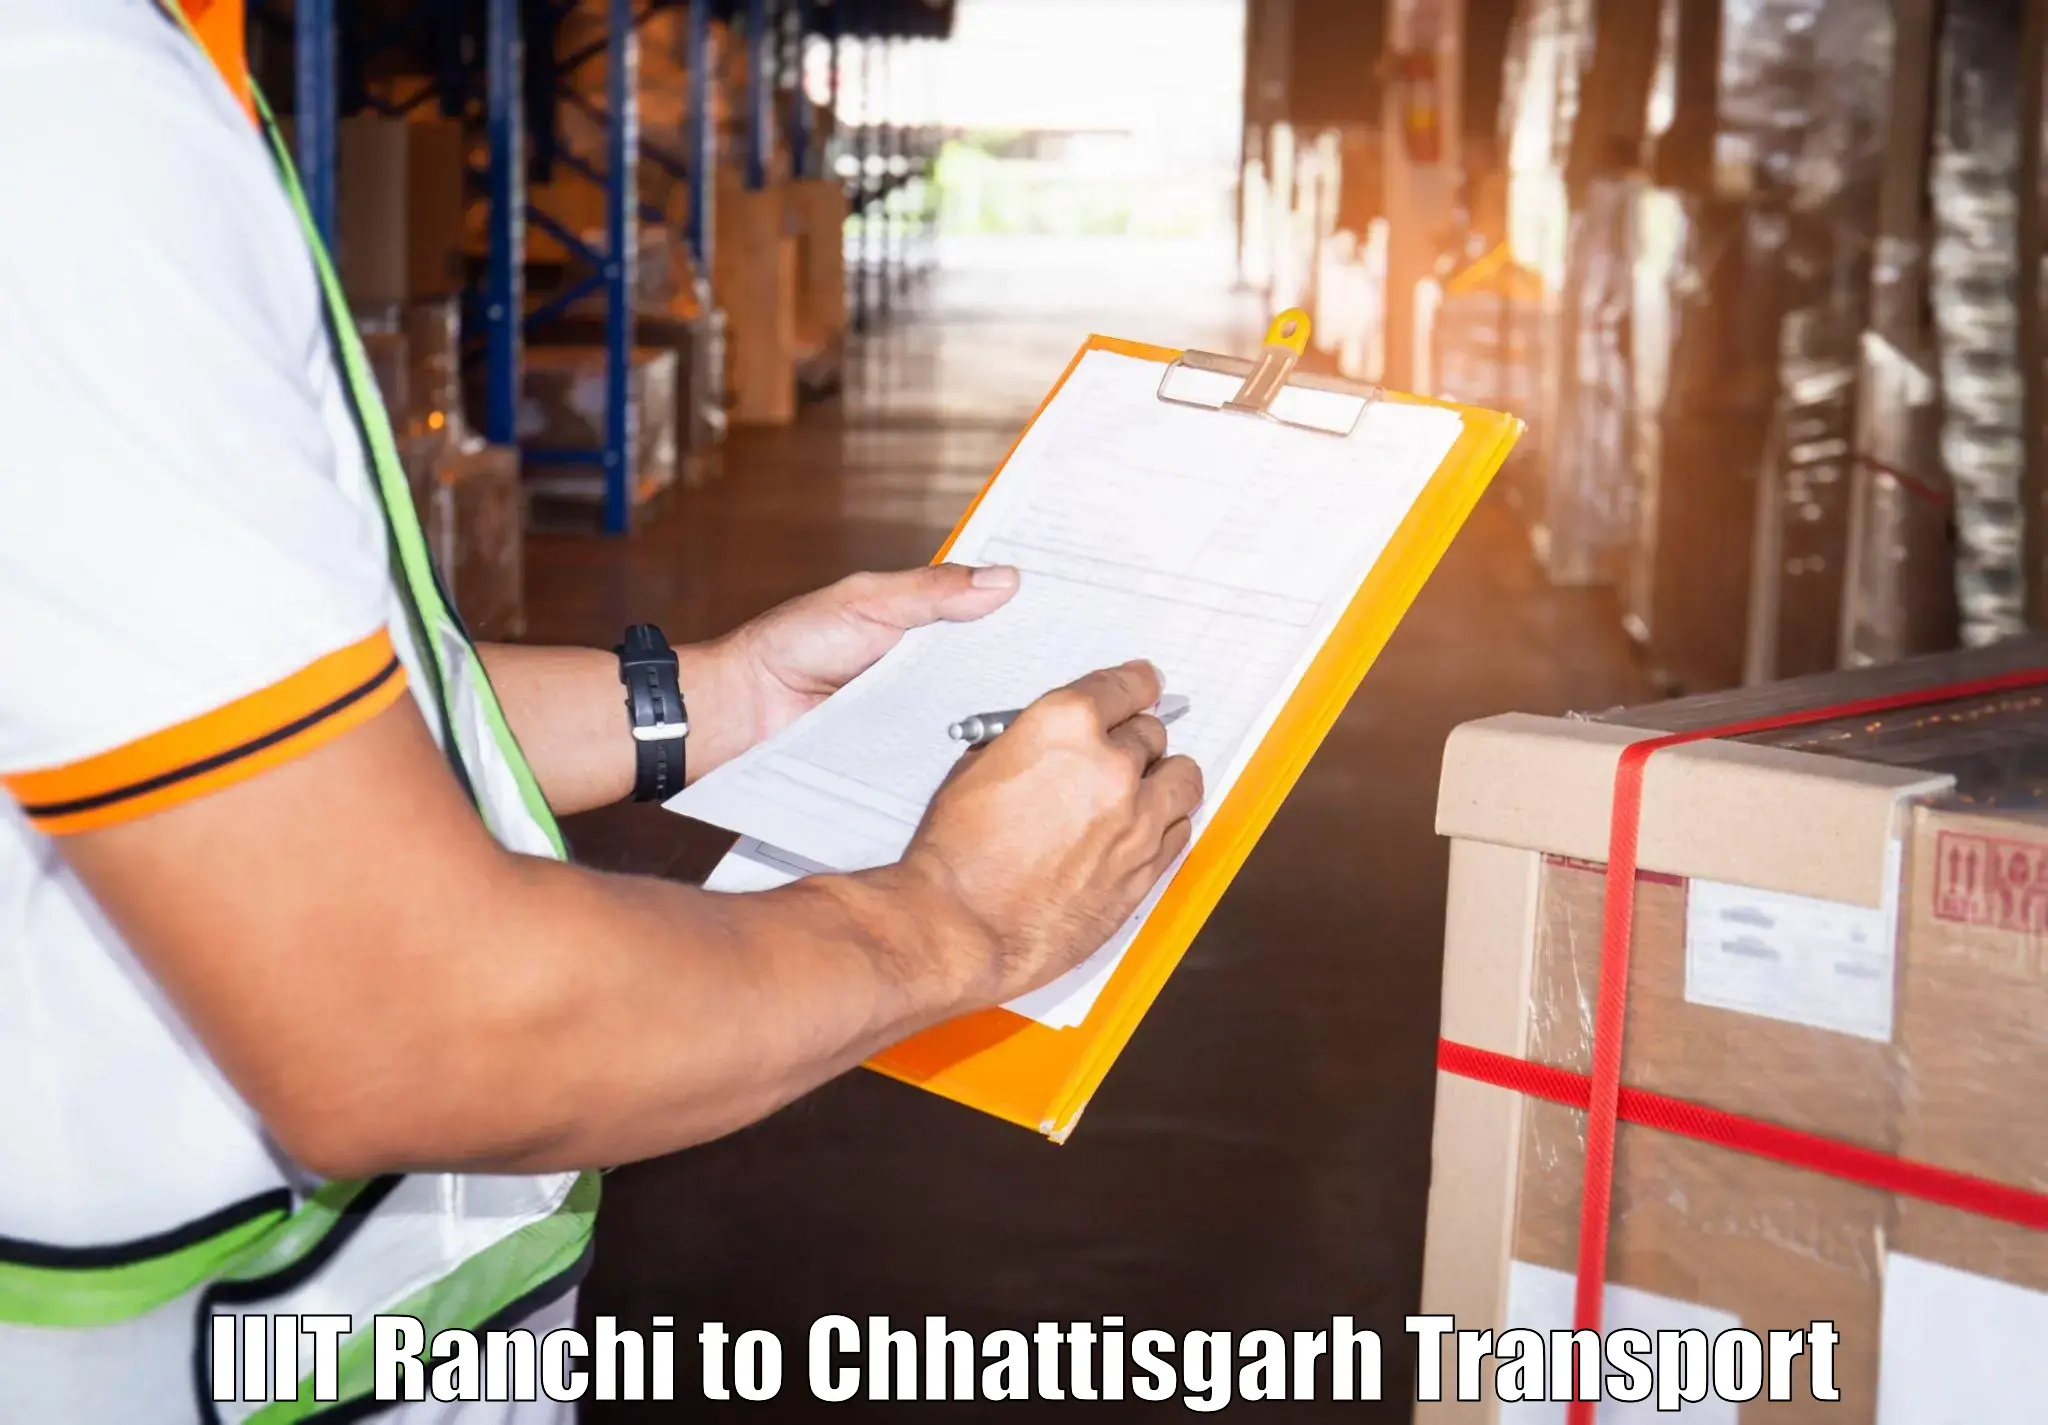 Express transport services IIIT Ranchi to Surajpur